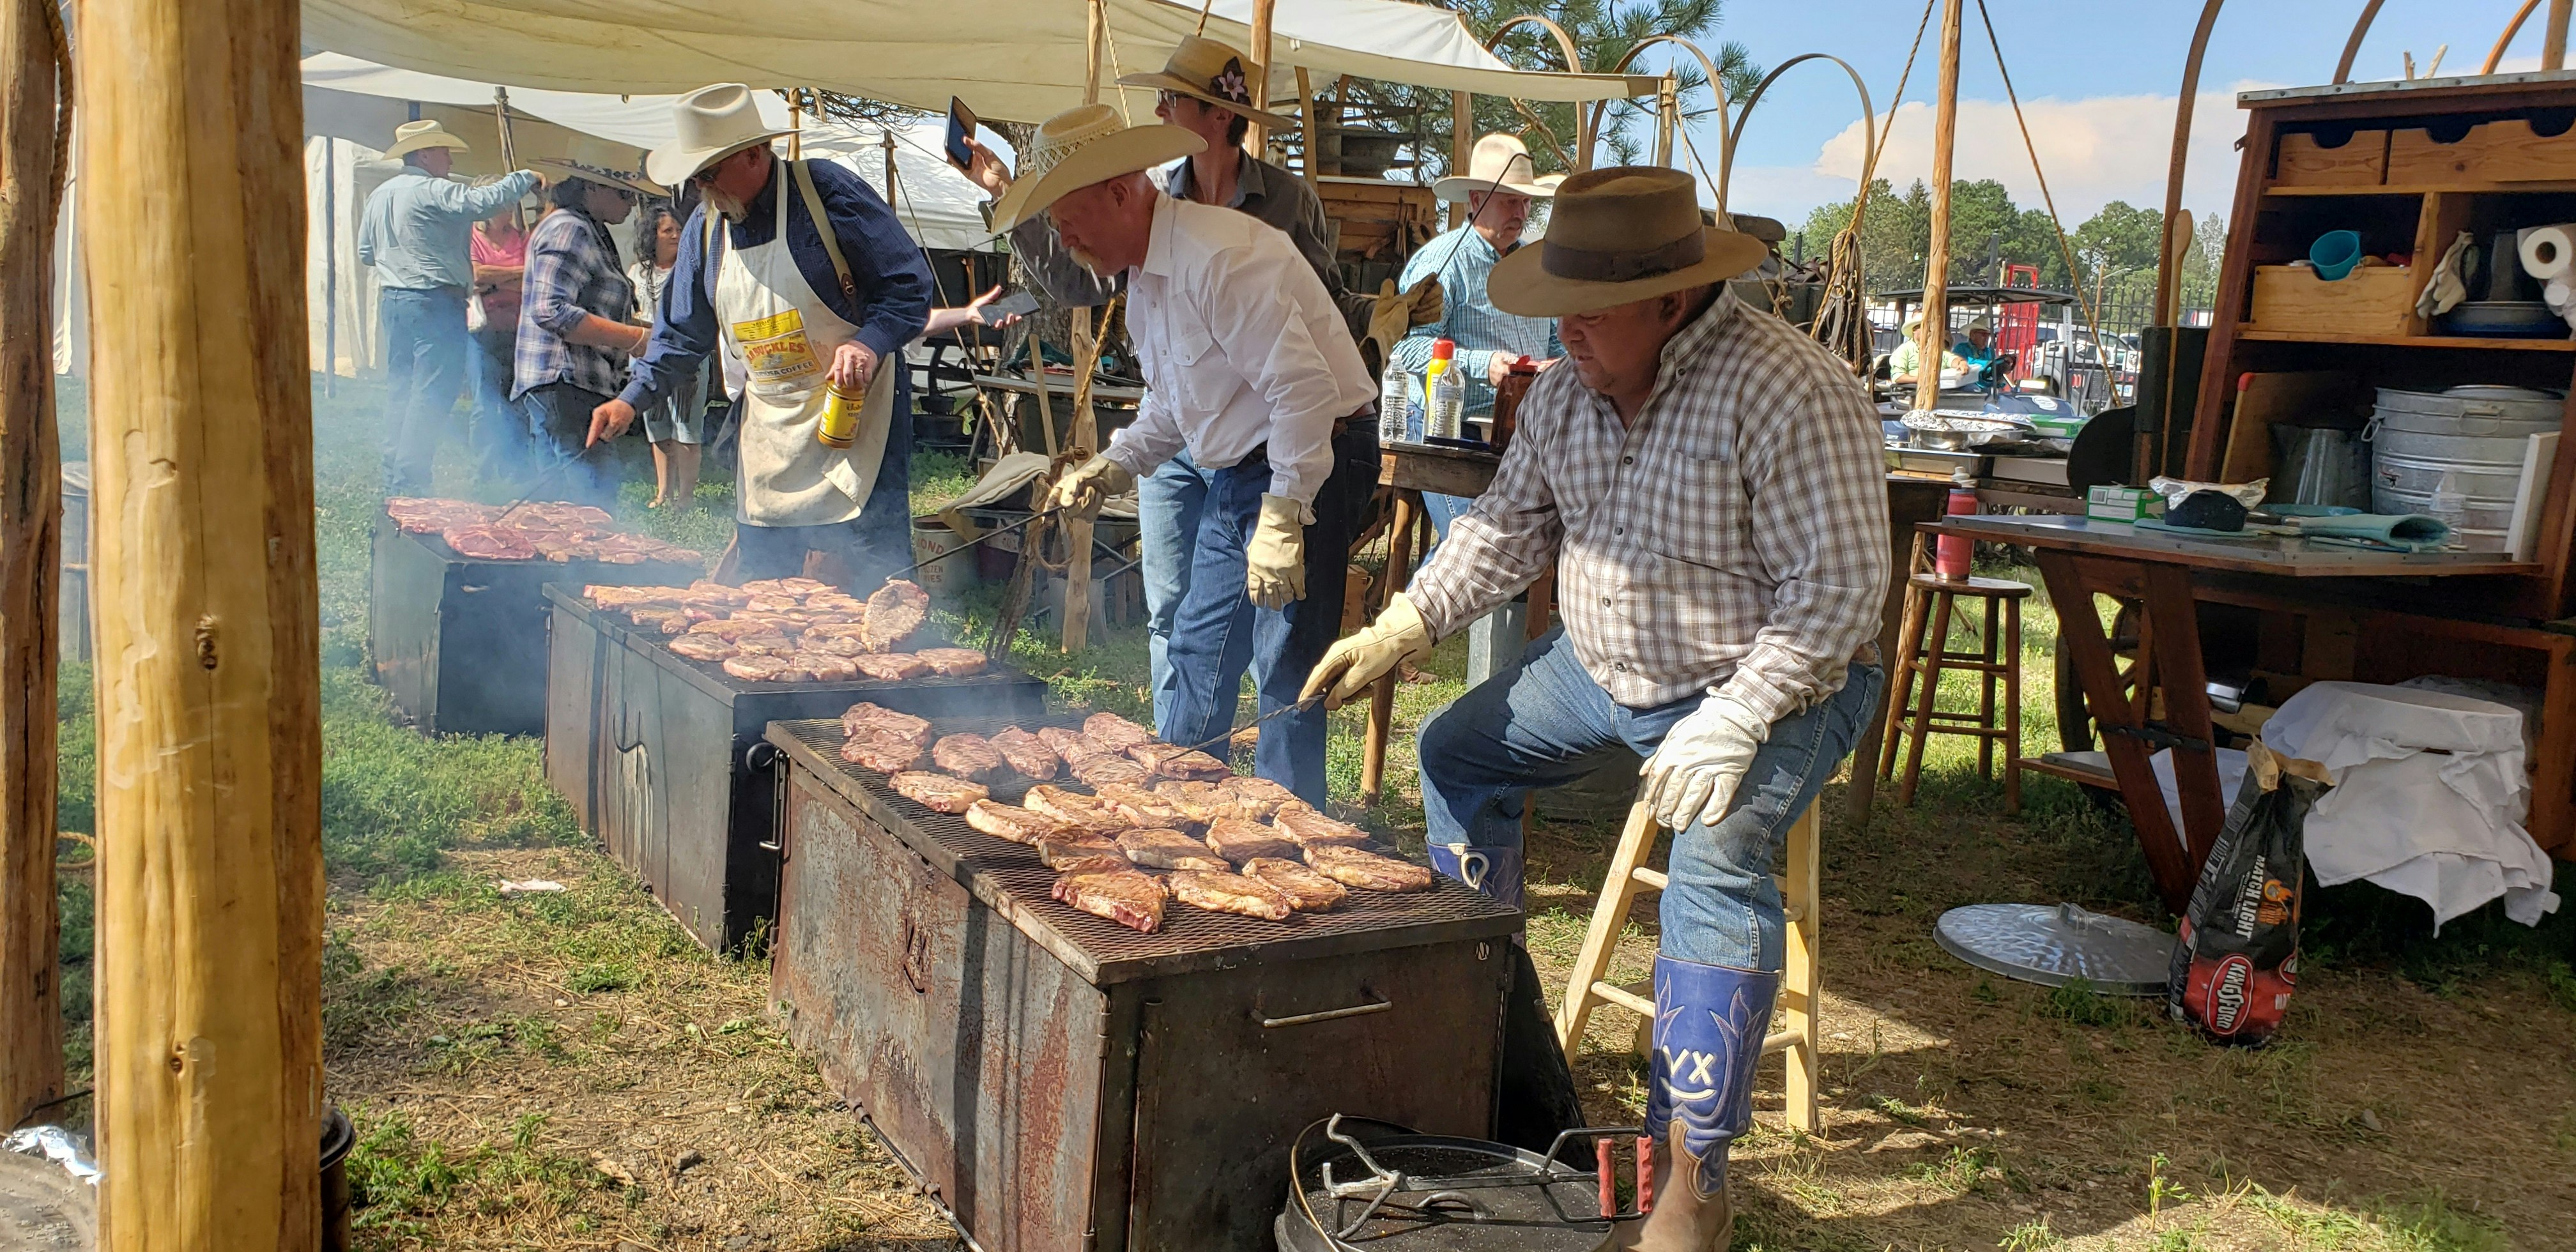 Each chuckwagon cook has an authentic blacksmith-made steak flipper to keep the ribeyes moving over the smoky fire.